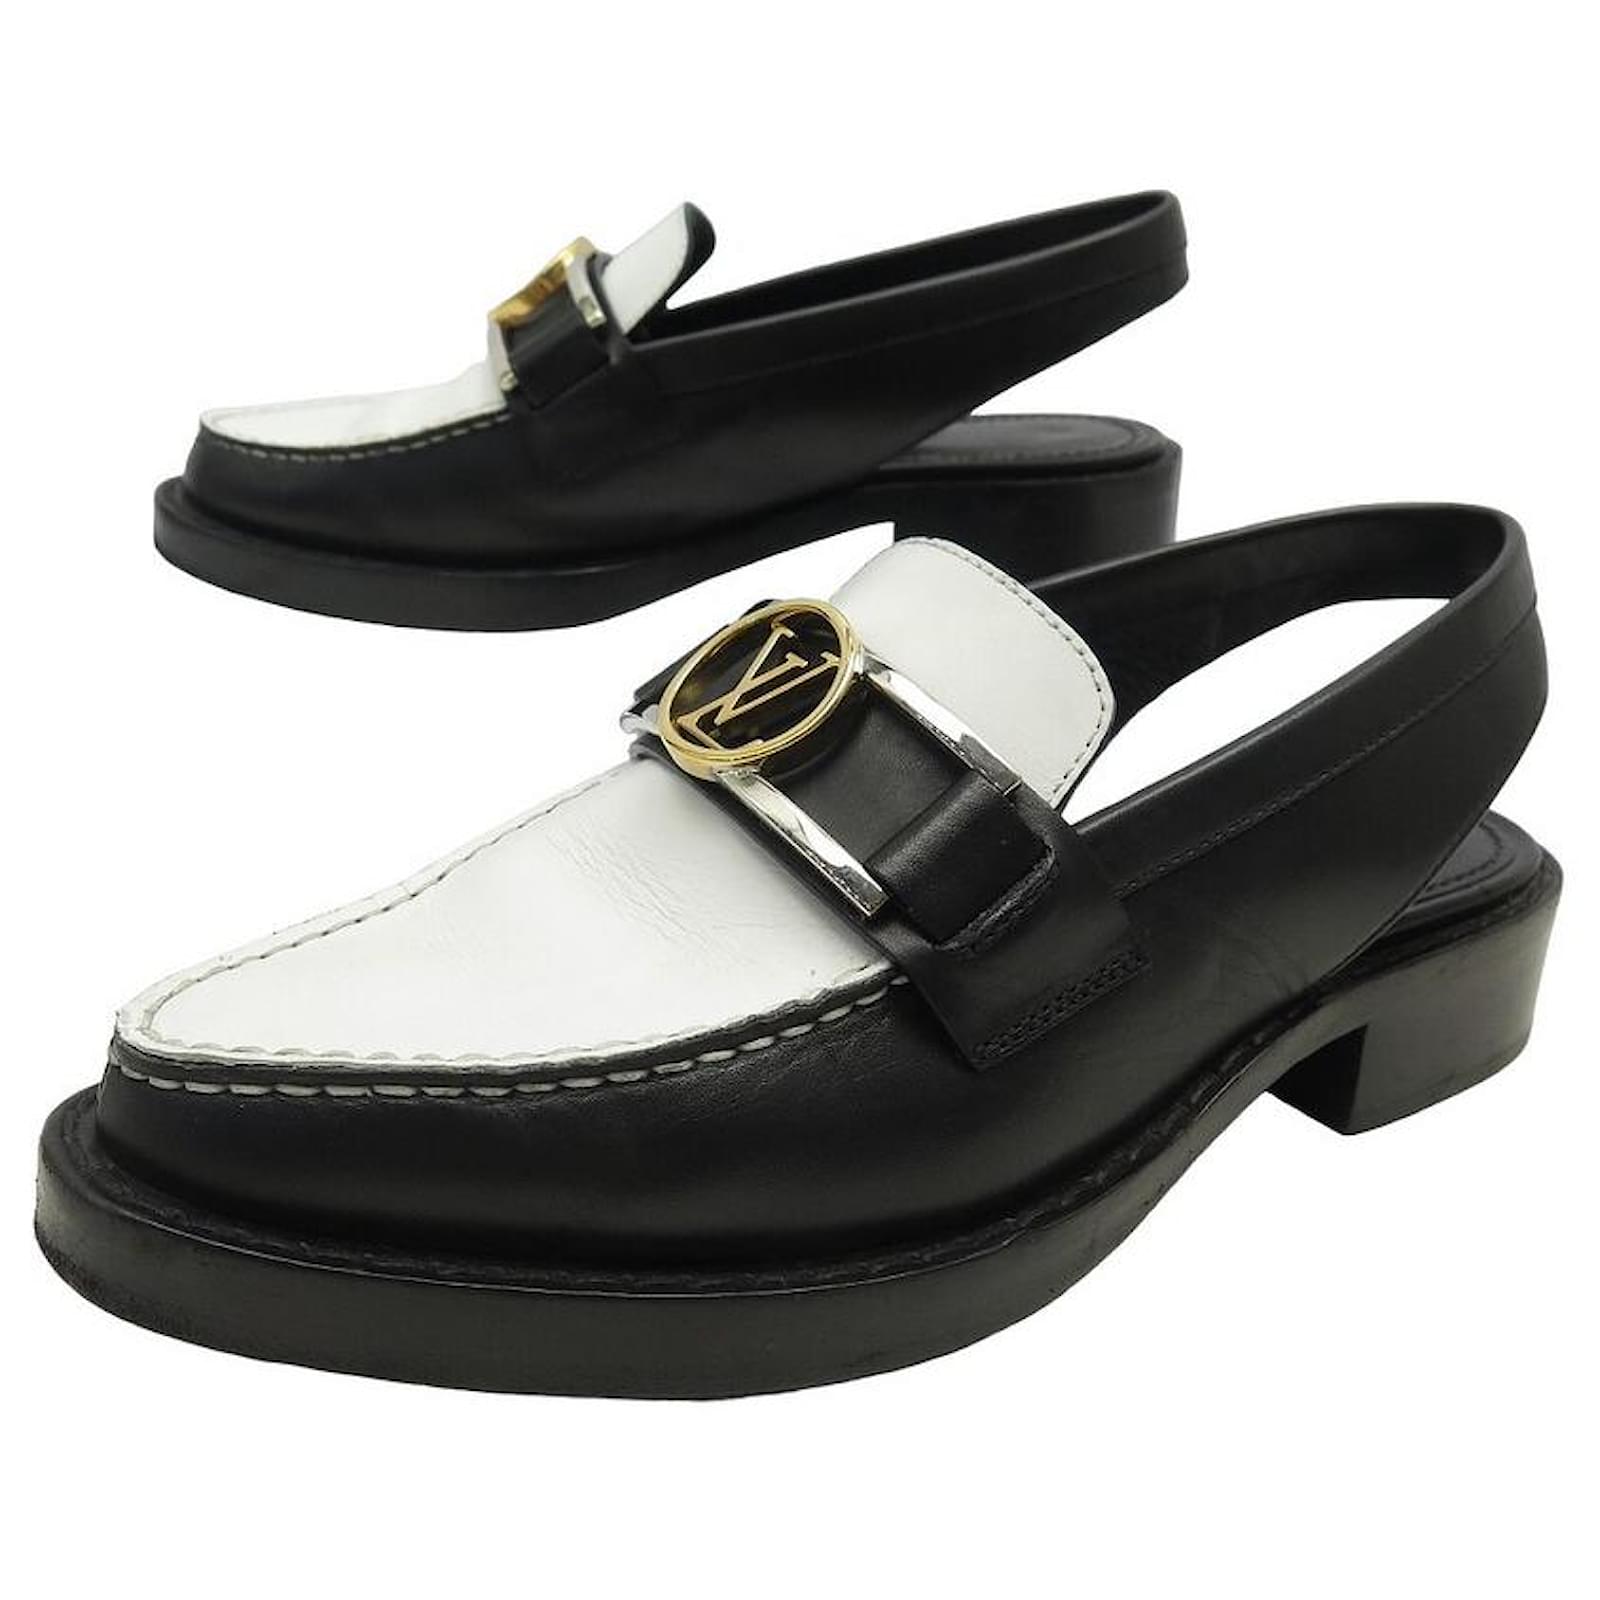 Academy Loafer - Shoes